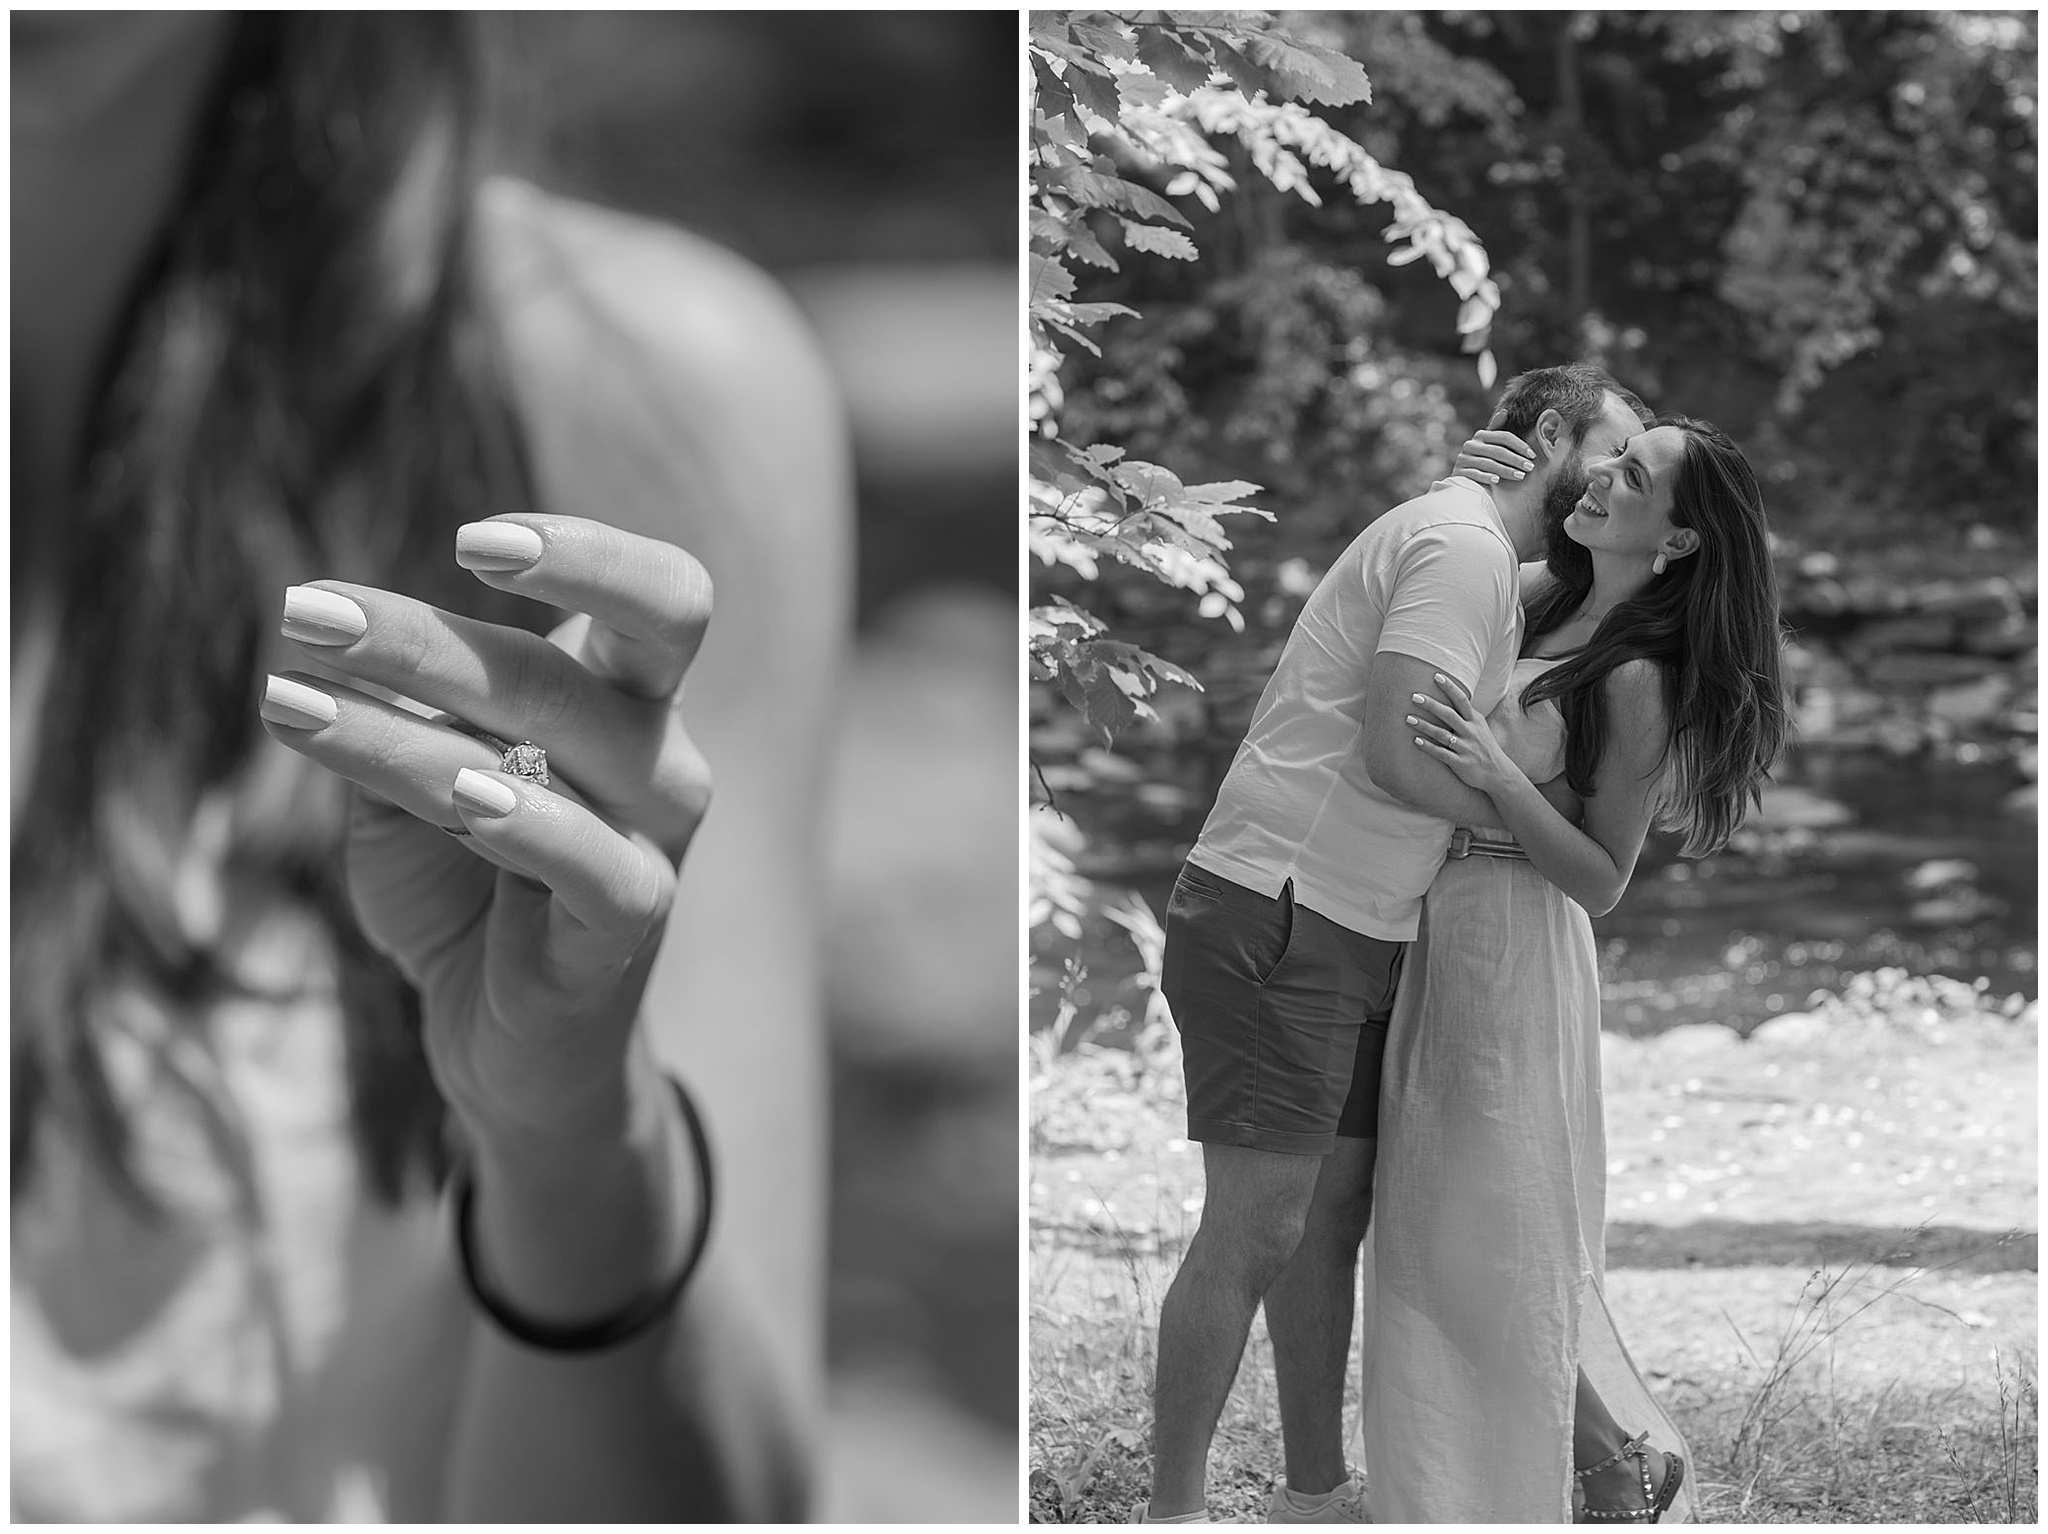 A newly engaged couple embrace in a park right after proposal dc engagement photographer